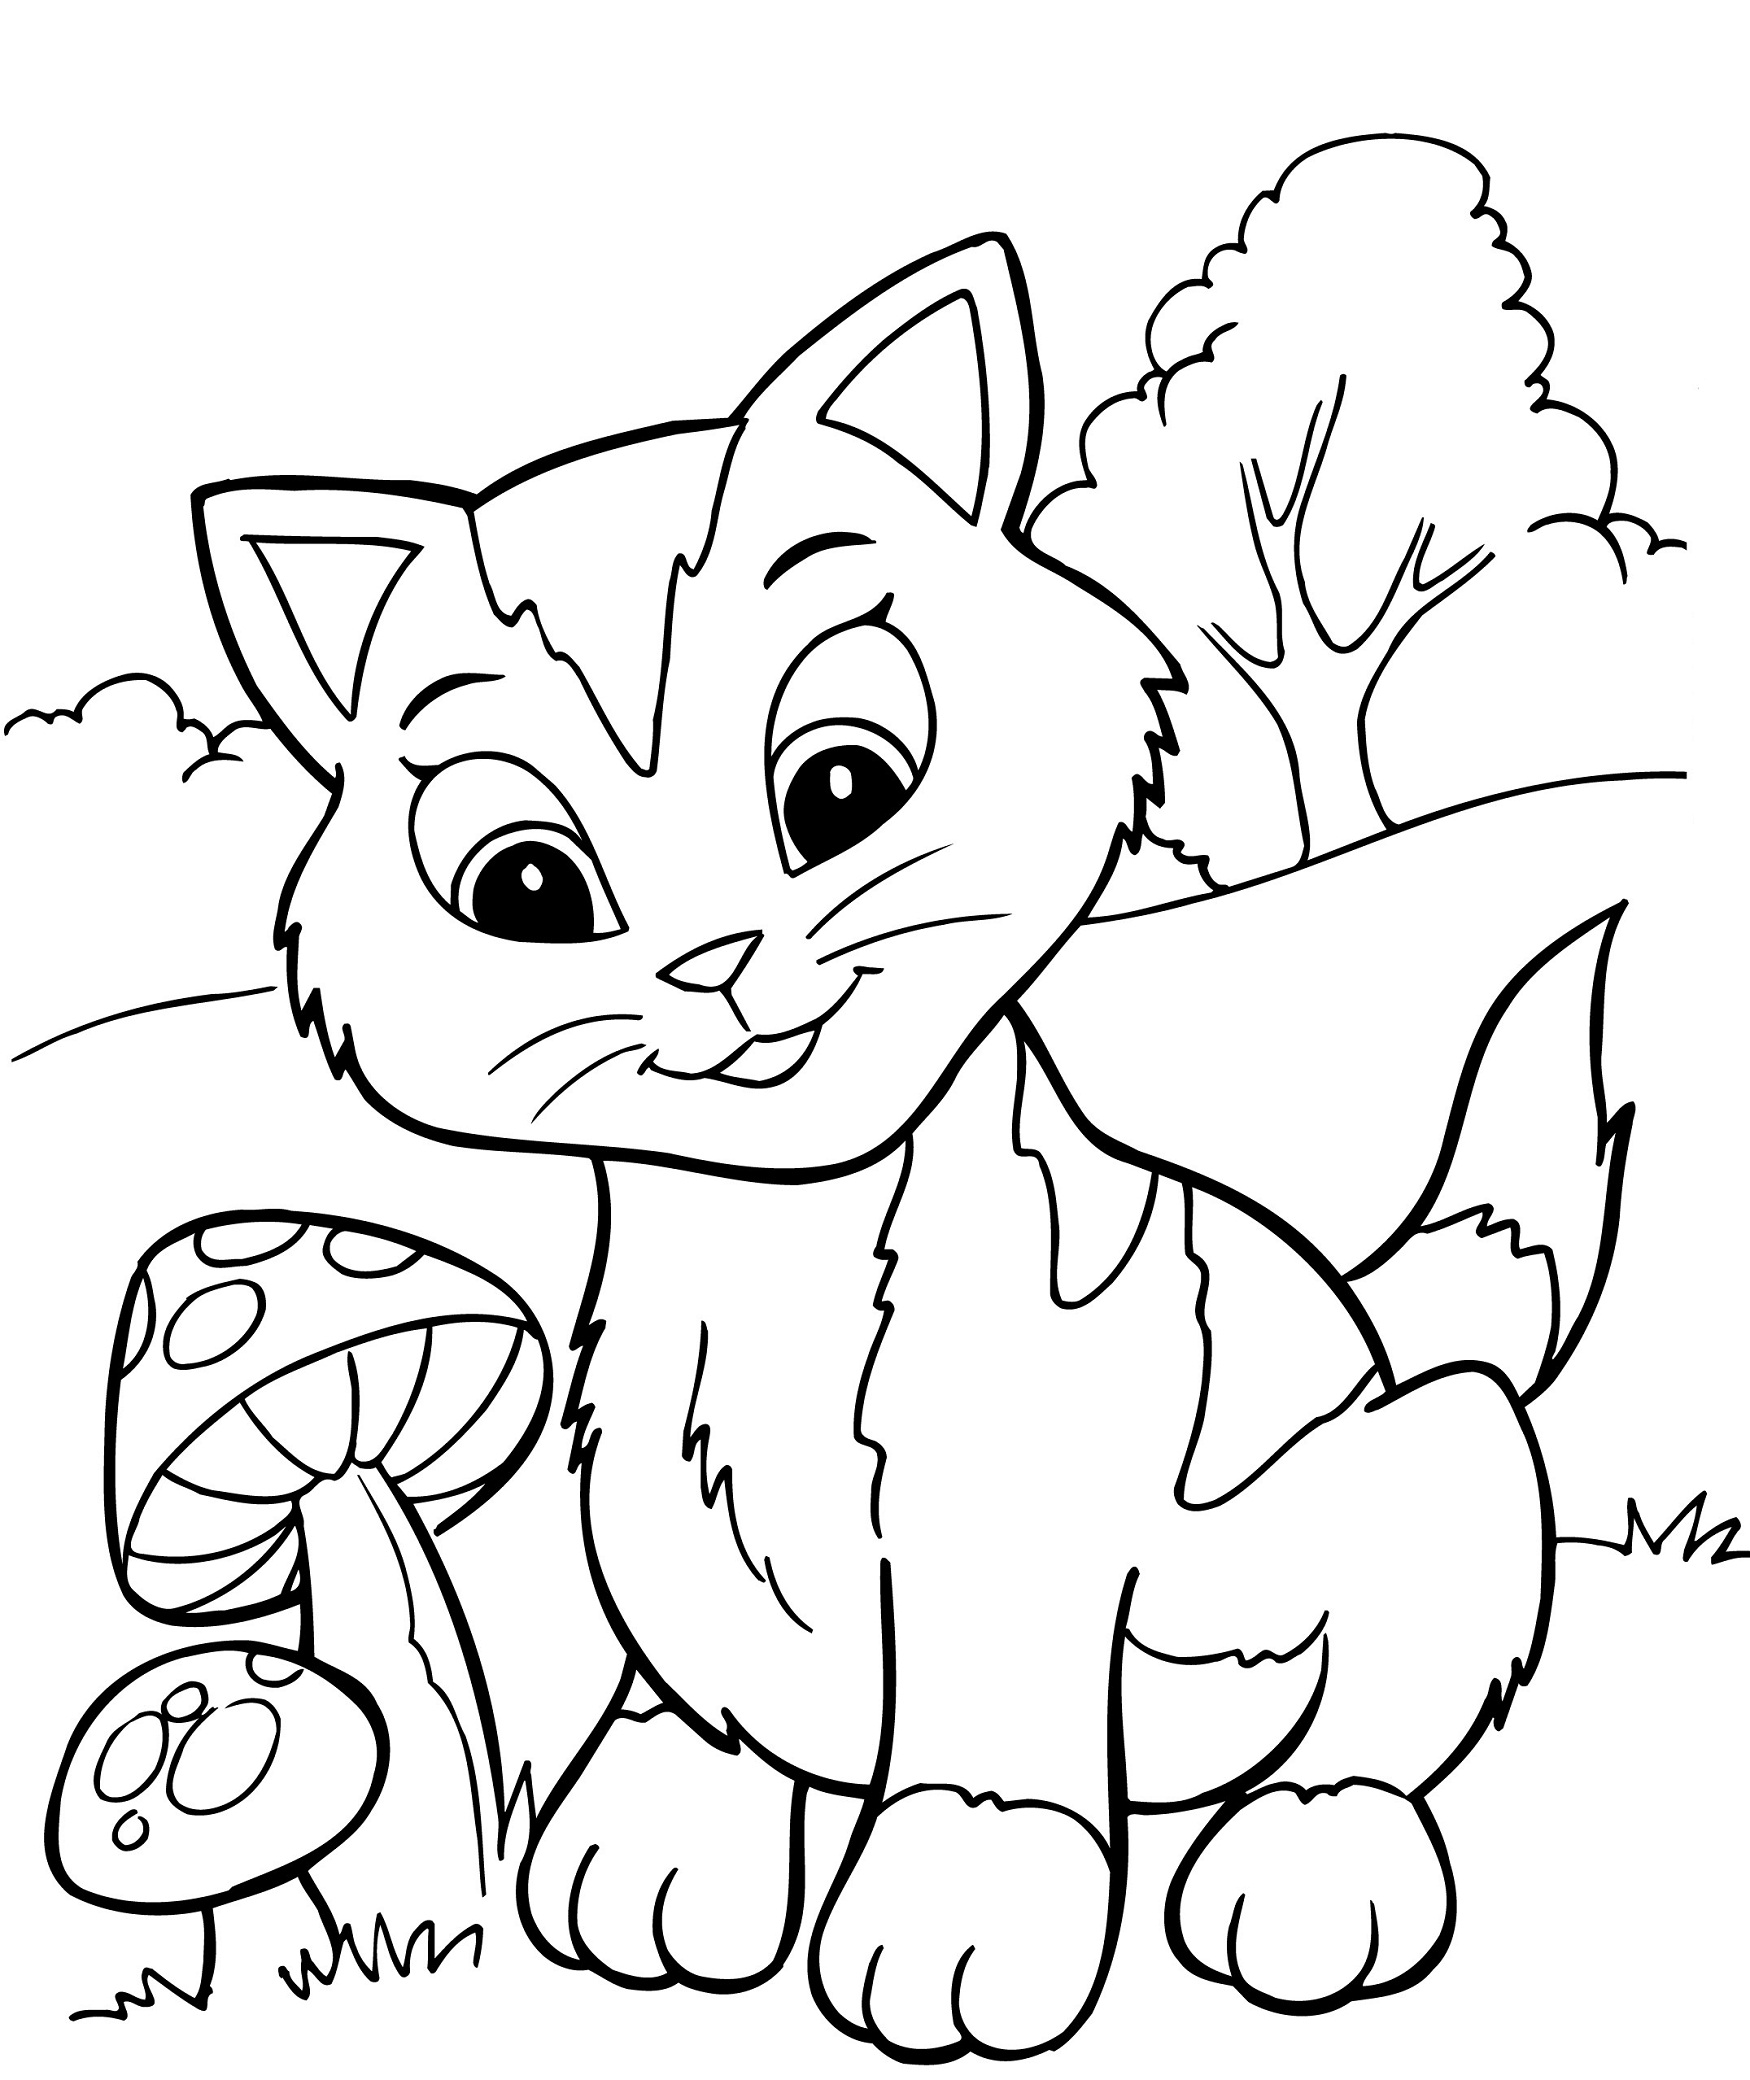 Free Printable Elmo Coloring Pages For Kids Free Printable Kitten 